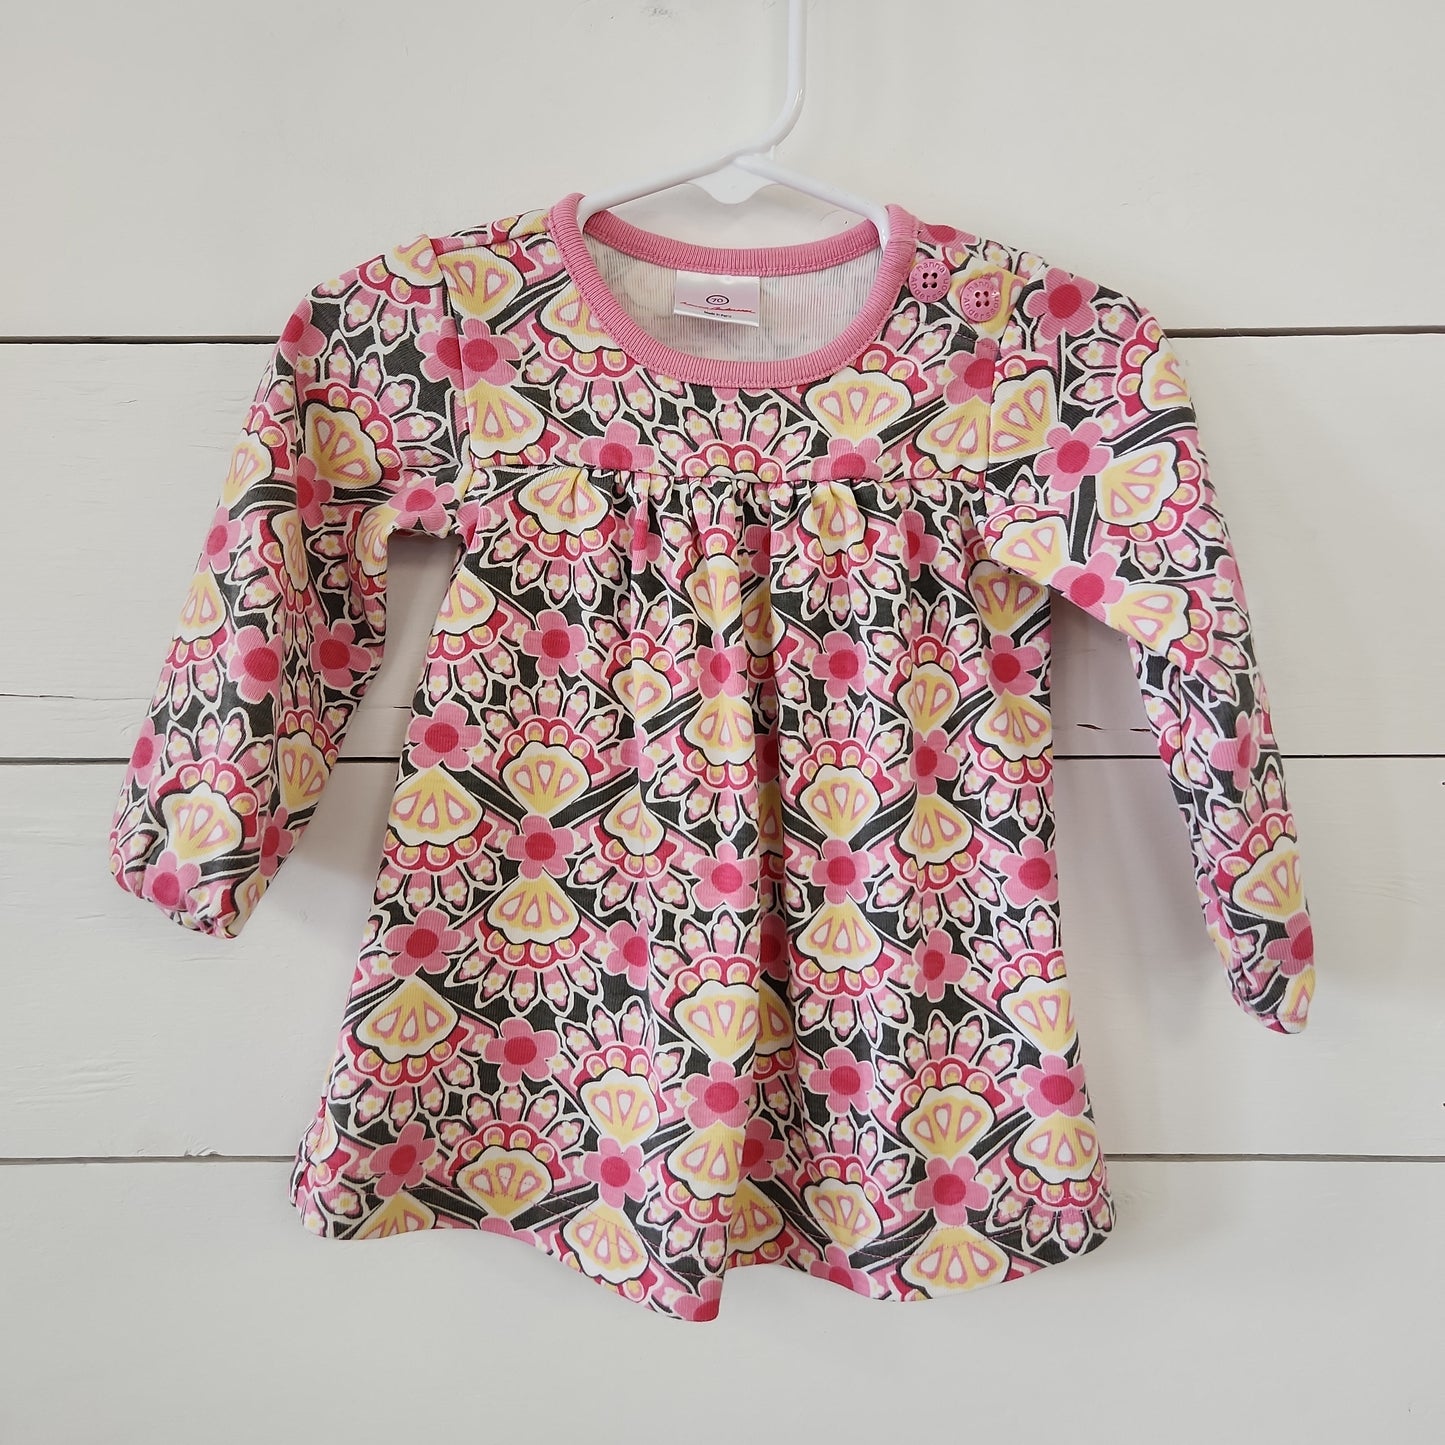 Size 6-12m | Hanna Andersson Dress | Secondhand